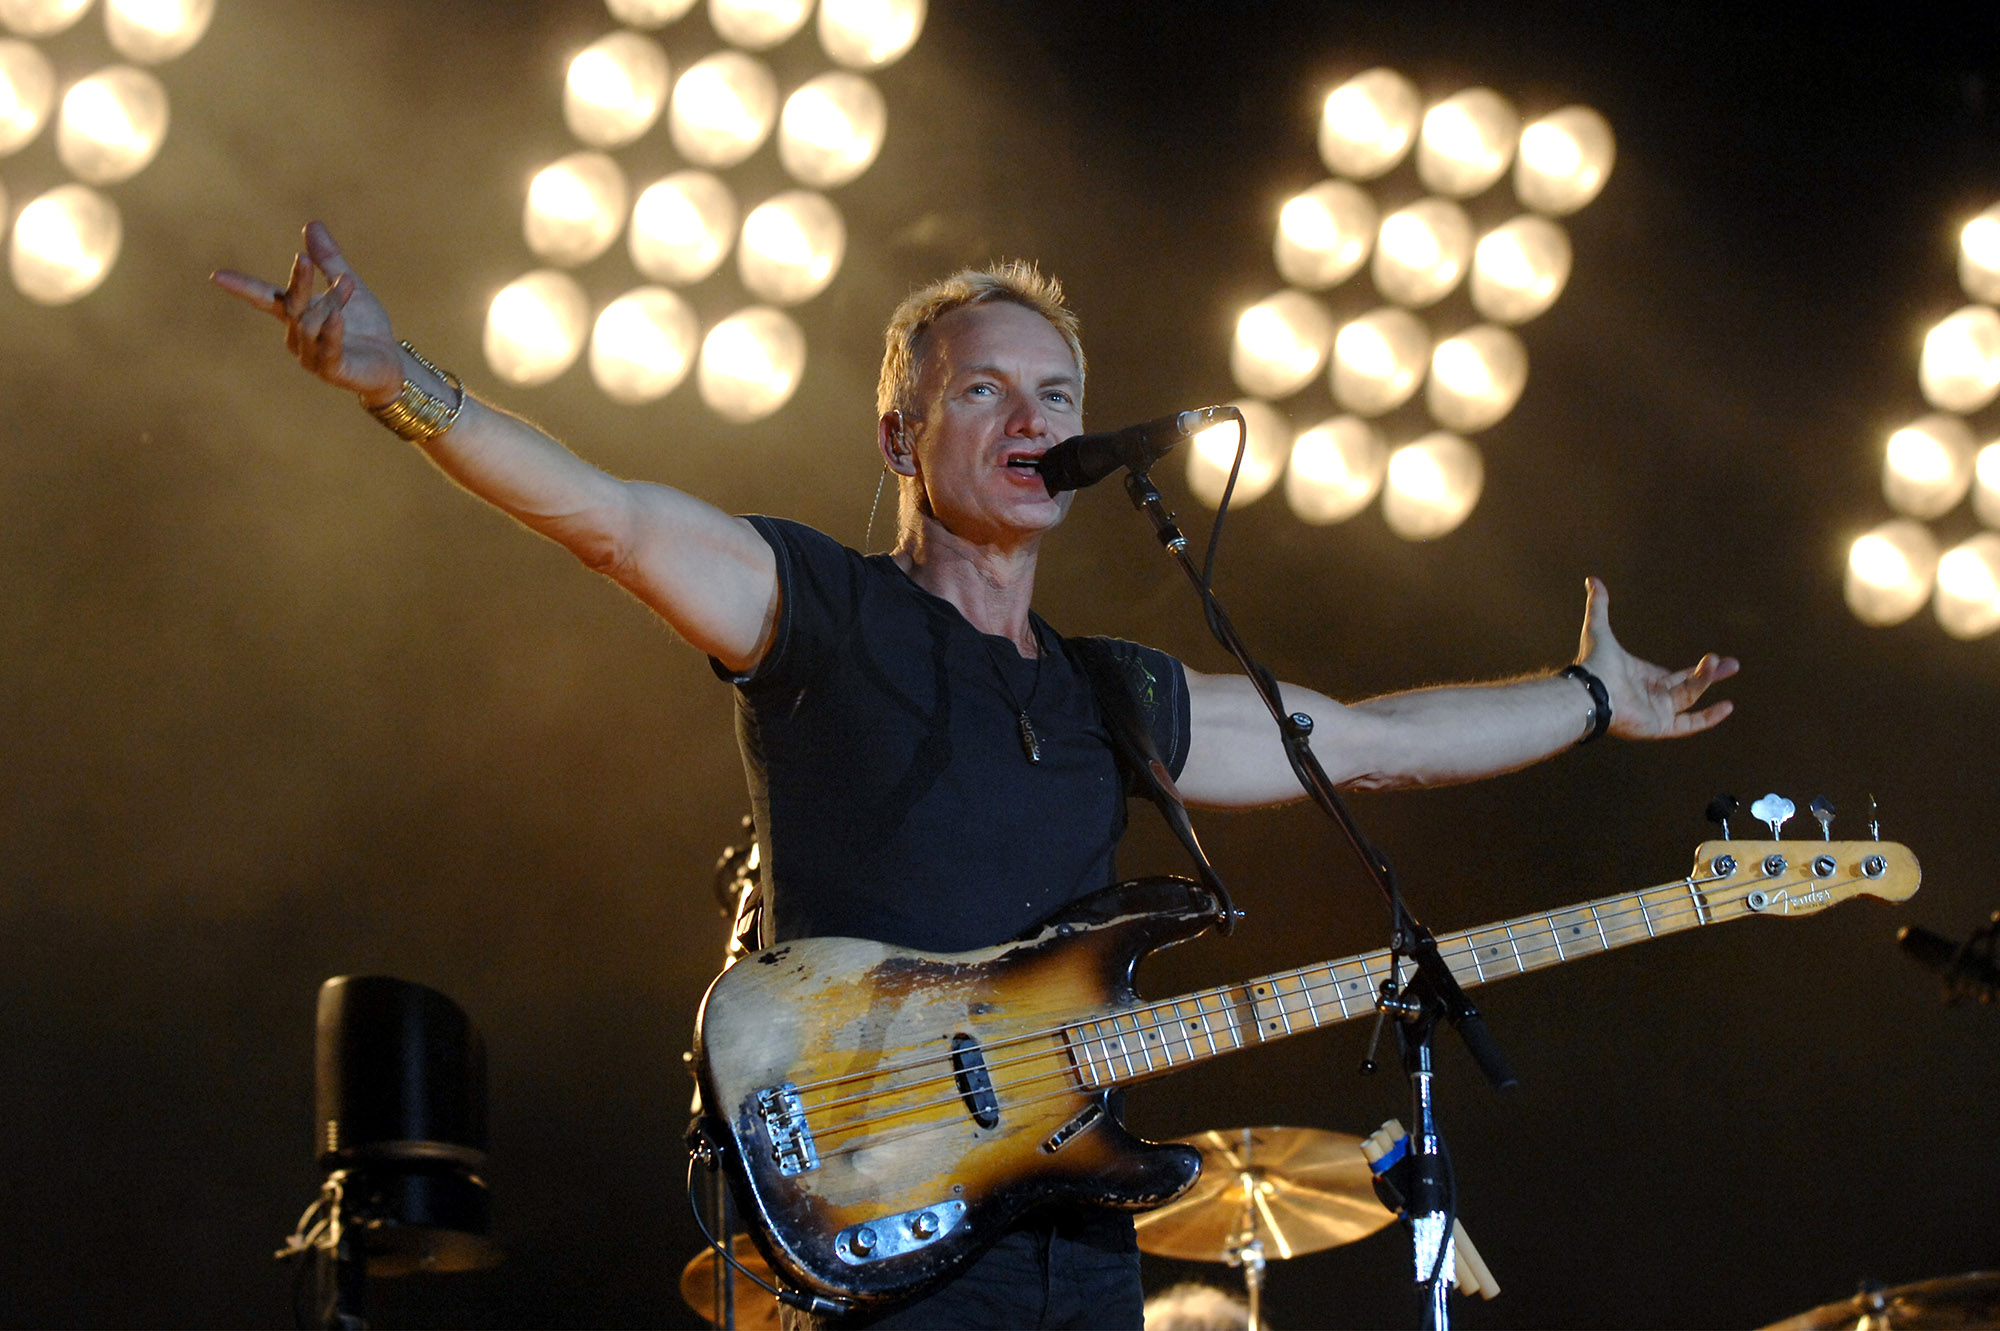 Turin Italy , 02 October 2007 , Live concert of The Police at the Delle Alpi Stadium : Sting, bassist and singer of The Police, during the concert